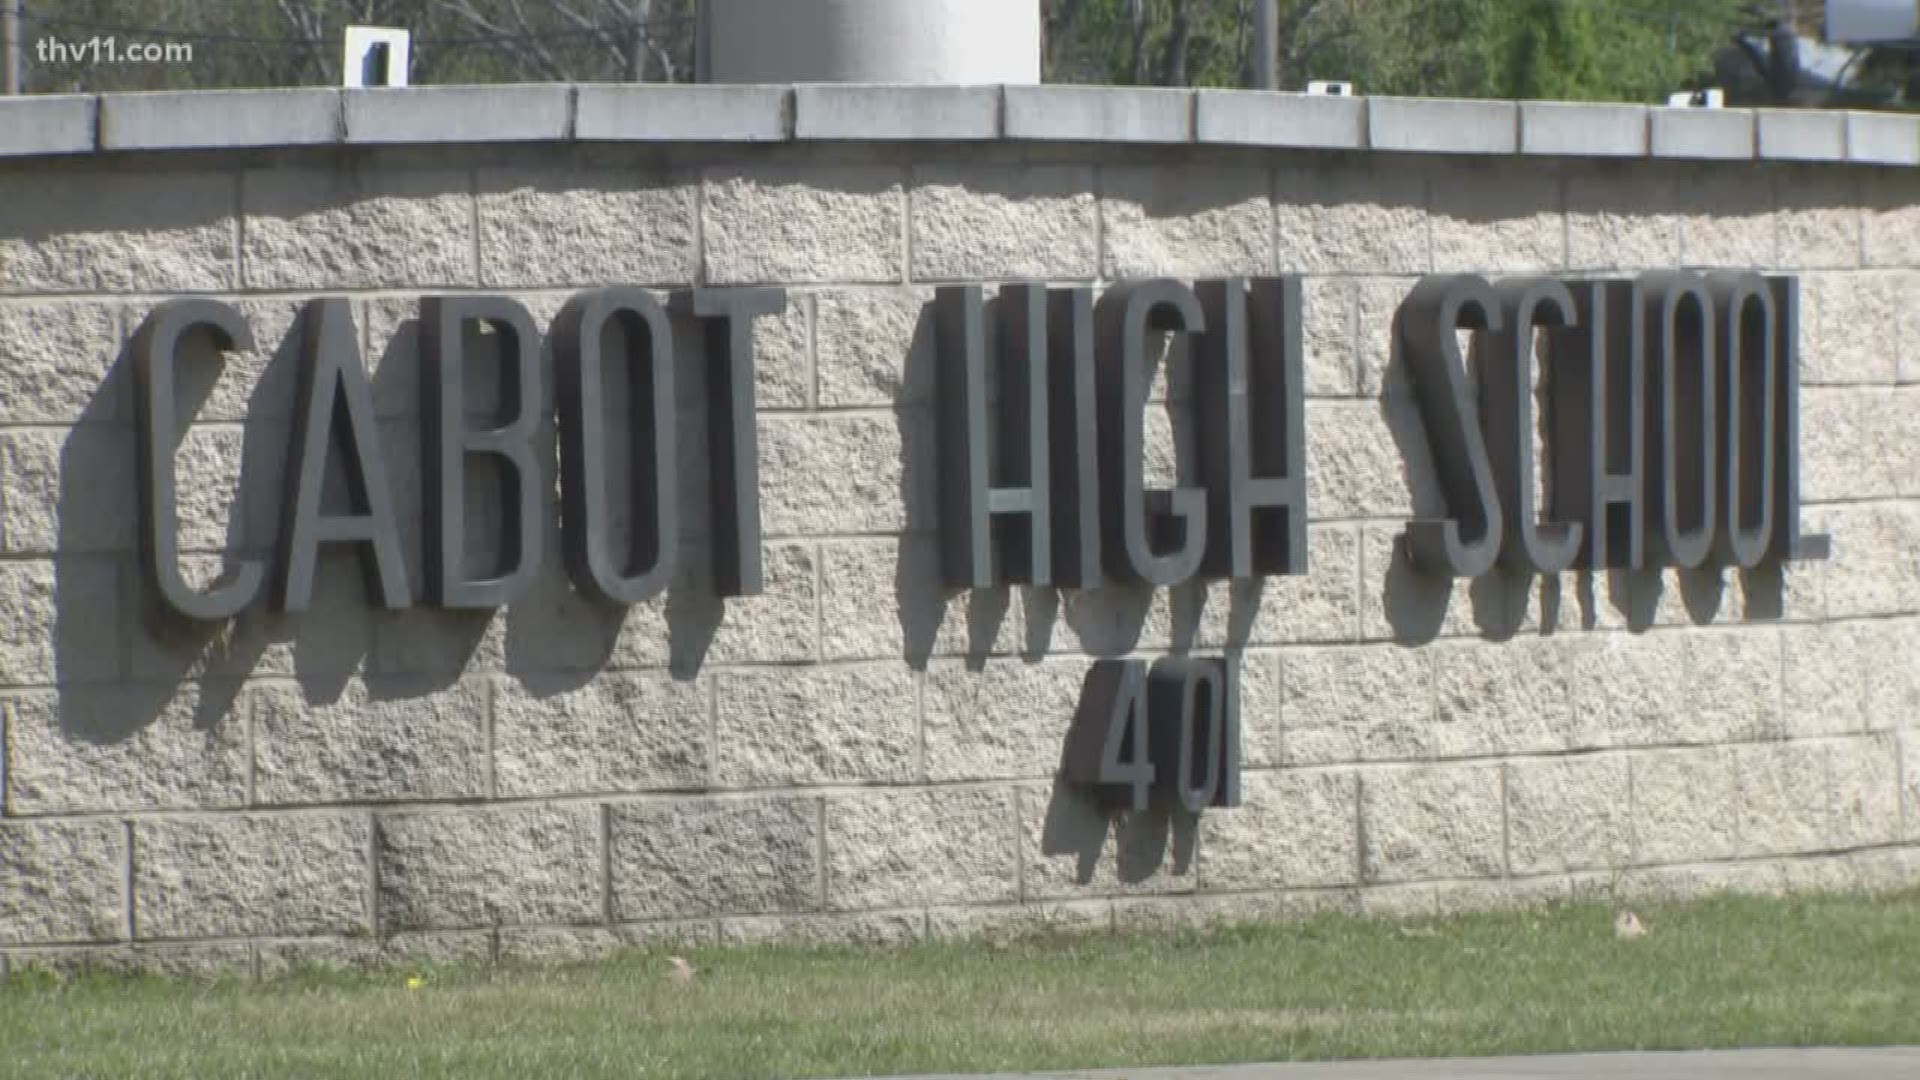 The Cabot Public School District took the unusual step of offering a reward for information about one of its own students.